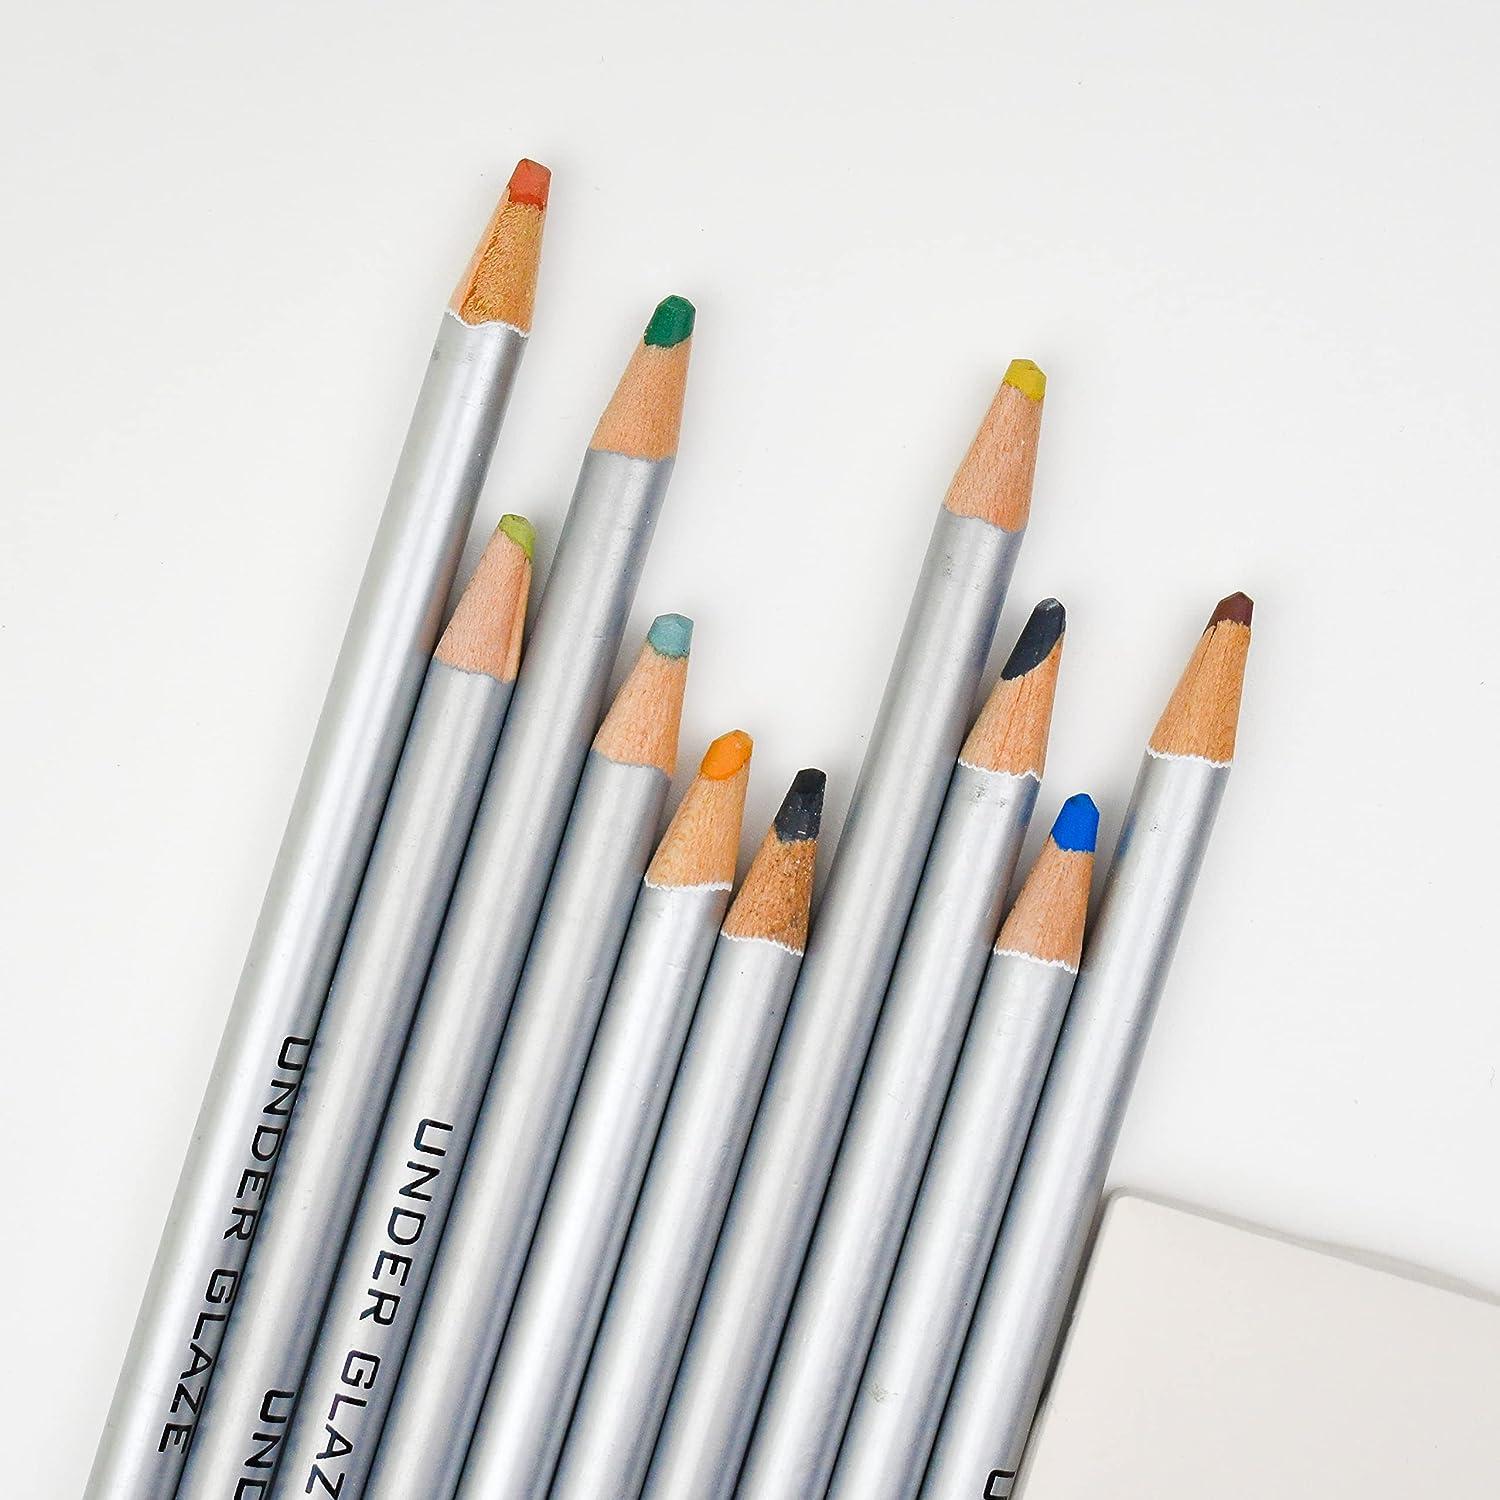 5pcs Underglaze Pencils For Pottery For Decorating Fused Glass And